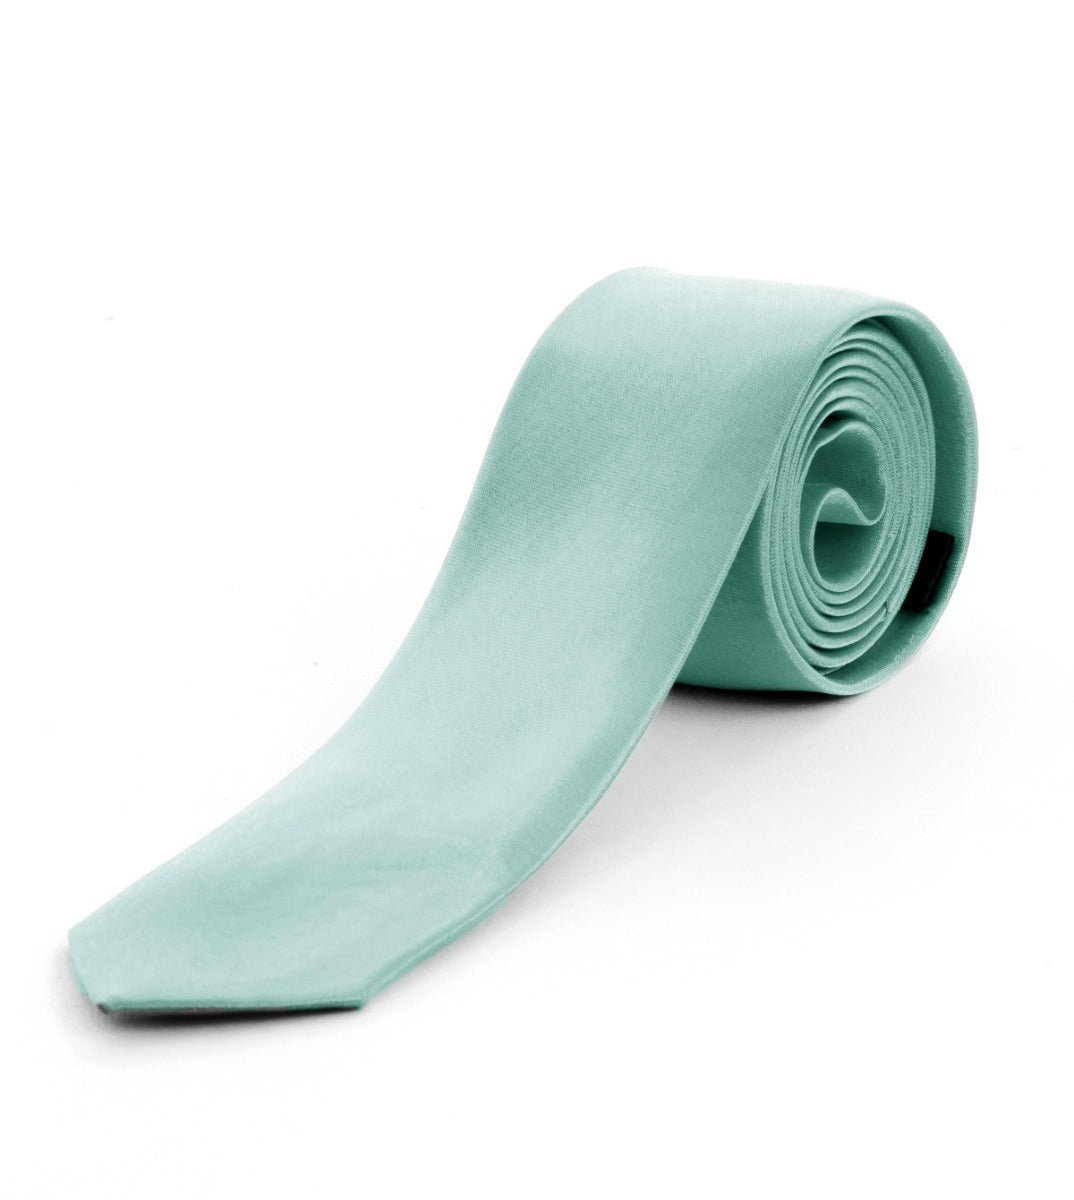 Unisex Men's Tie Thin Tie Elegant Ceremony Casual Basic Water Green Satin GIOSAL-CP1119A